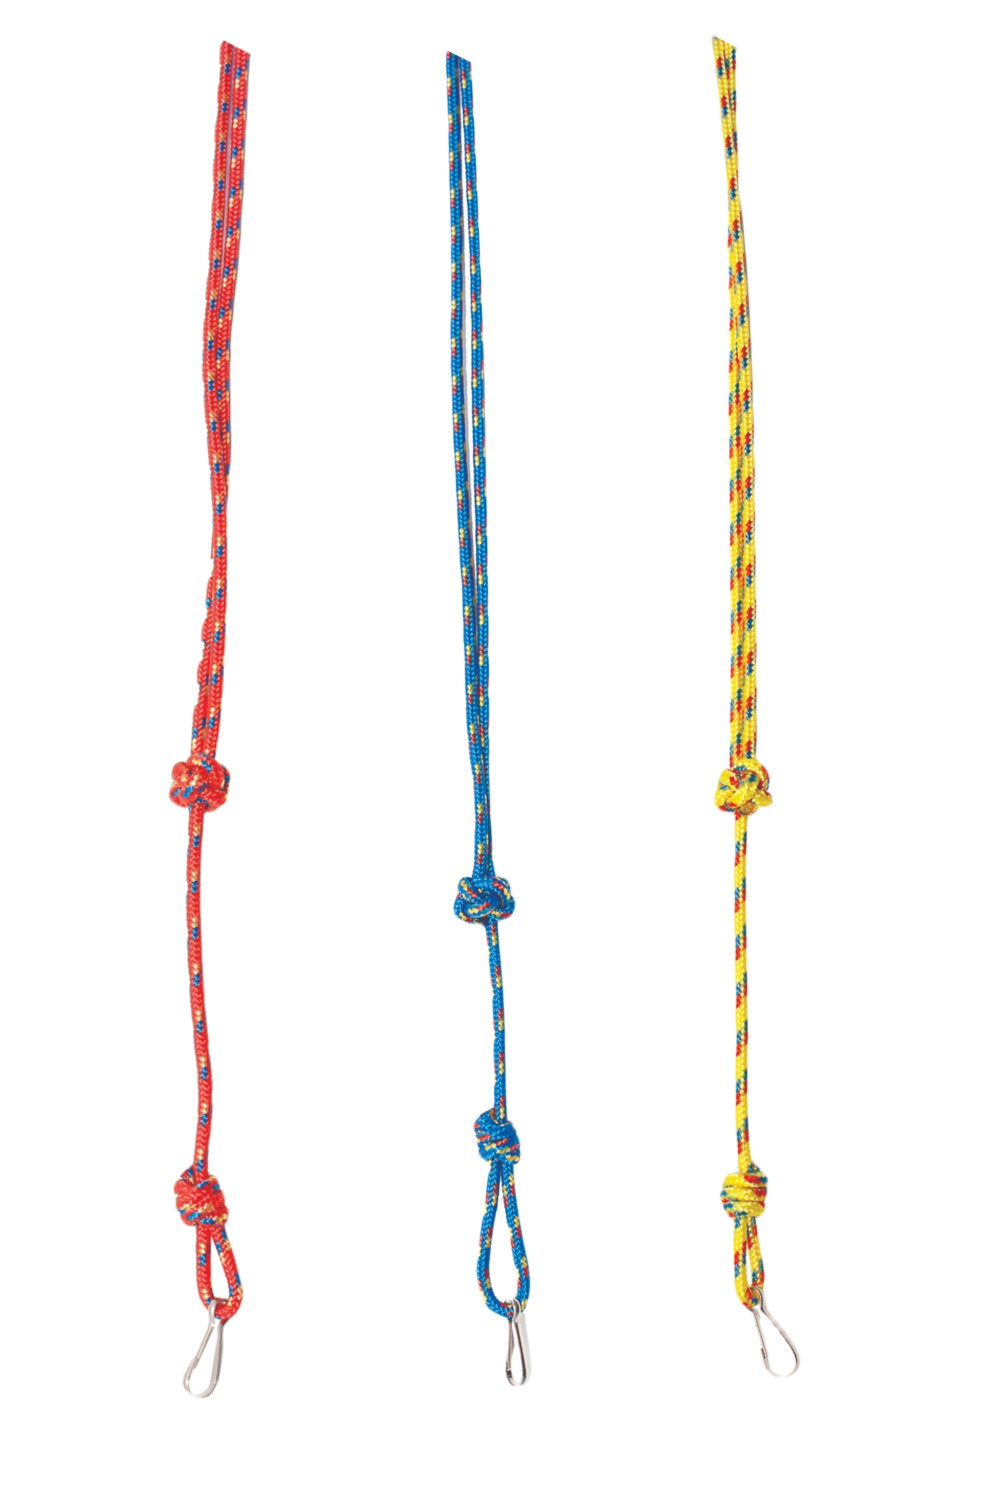 Bisley Multicoloured Lanyards In Red, Blue and Yellow